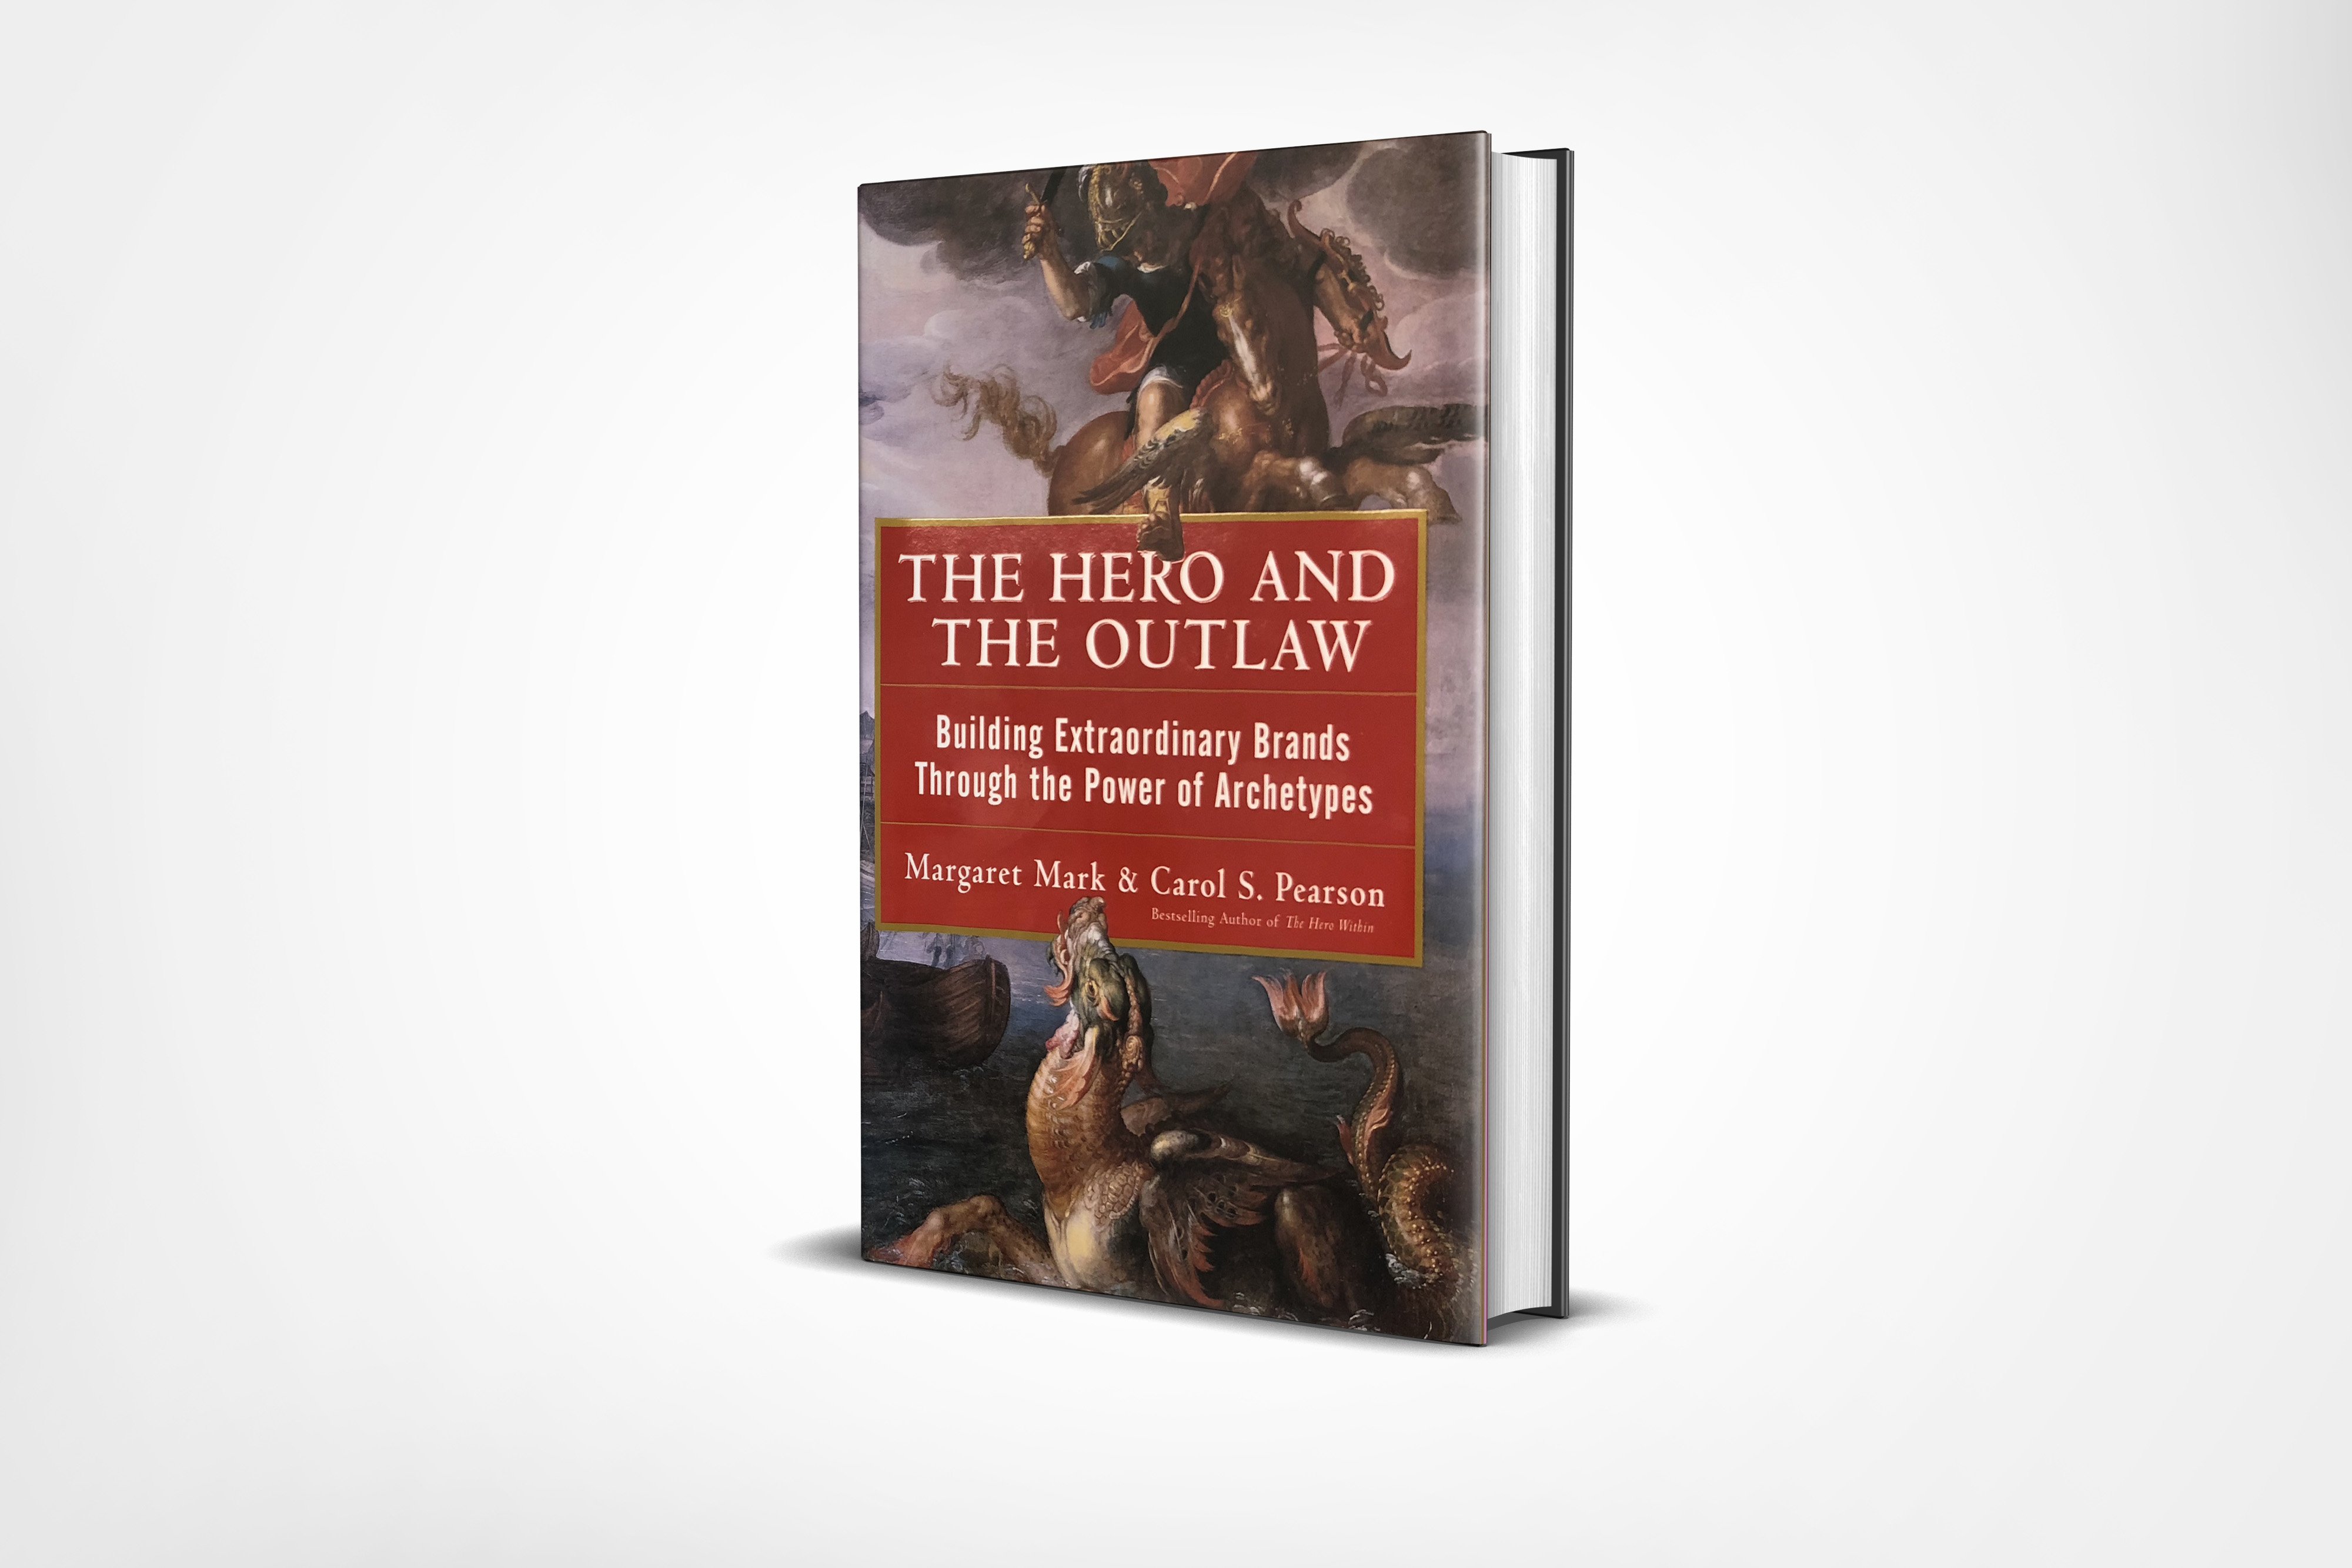 Libro “The Hero and the Outlaw"